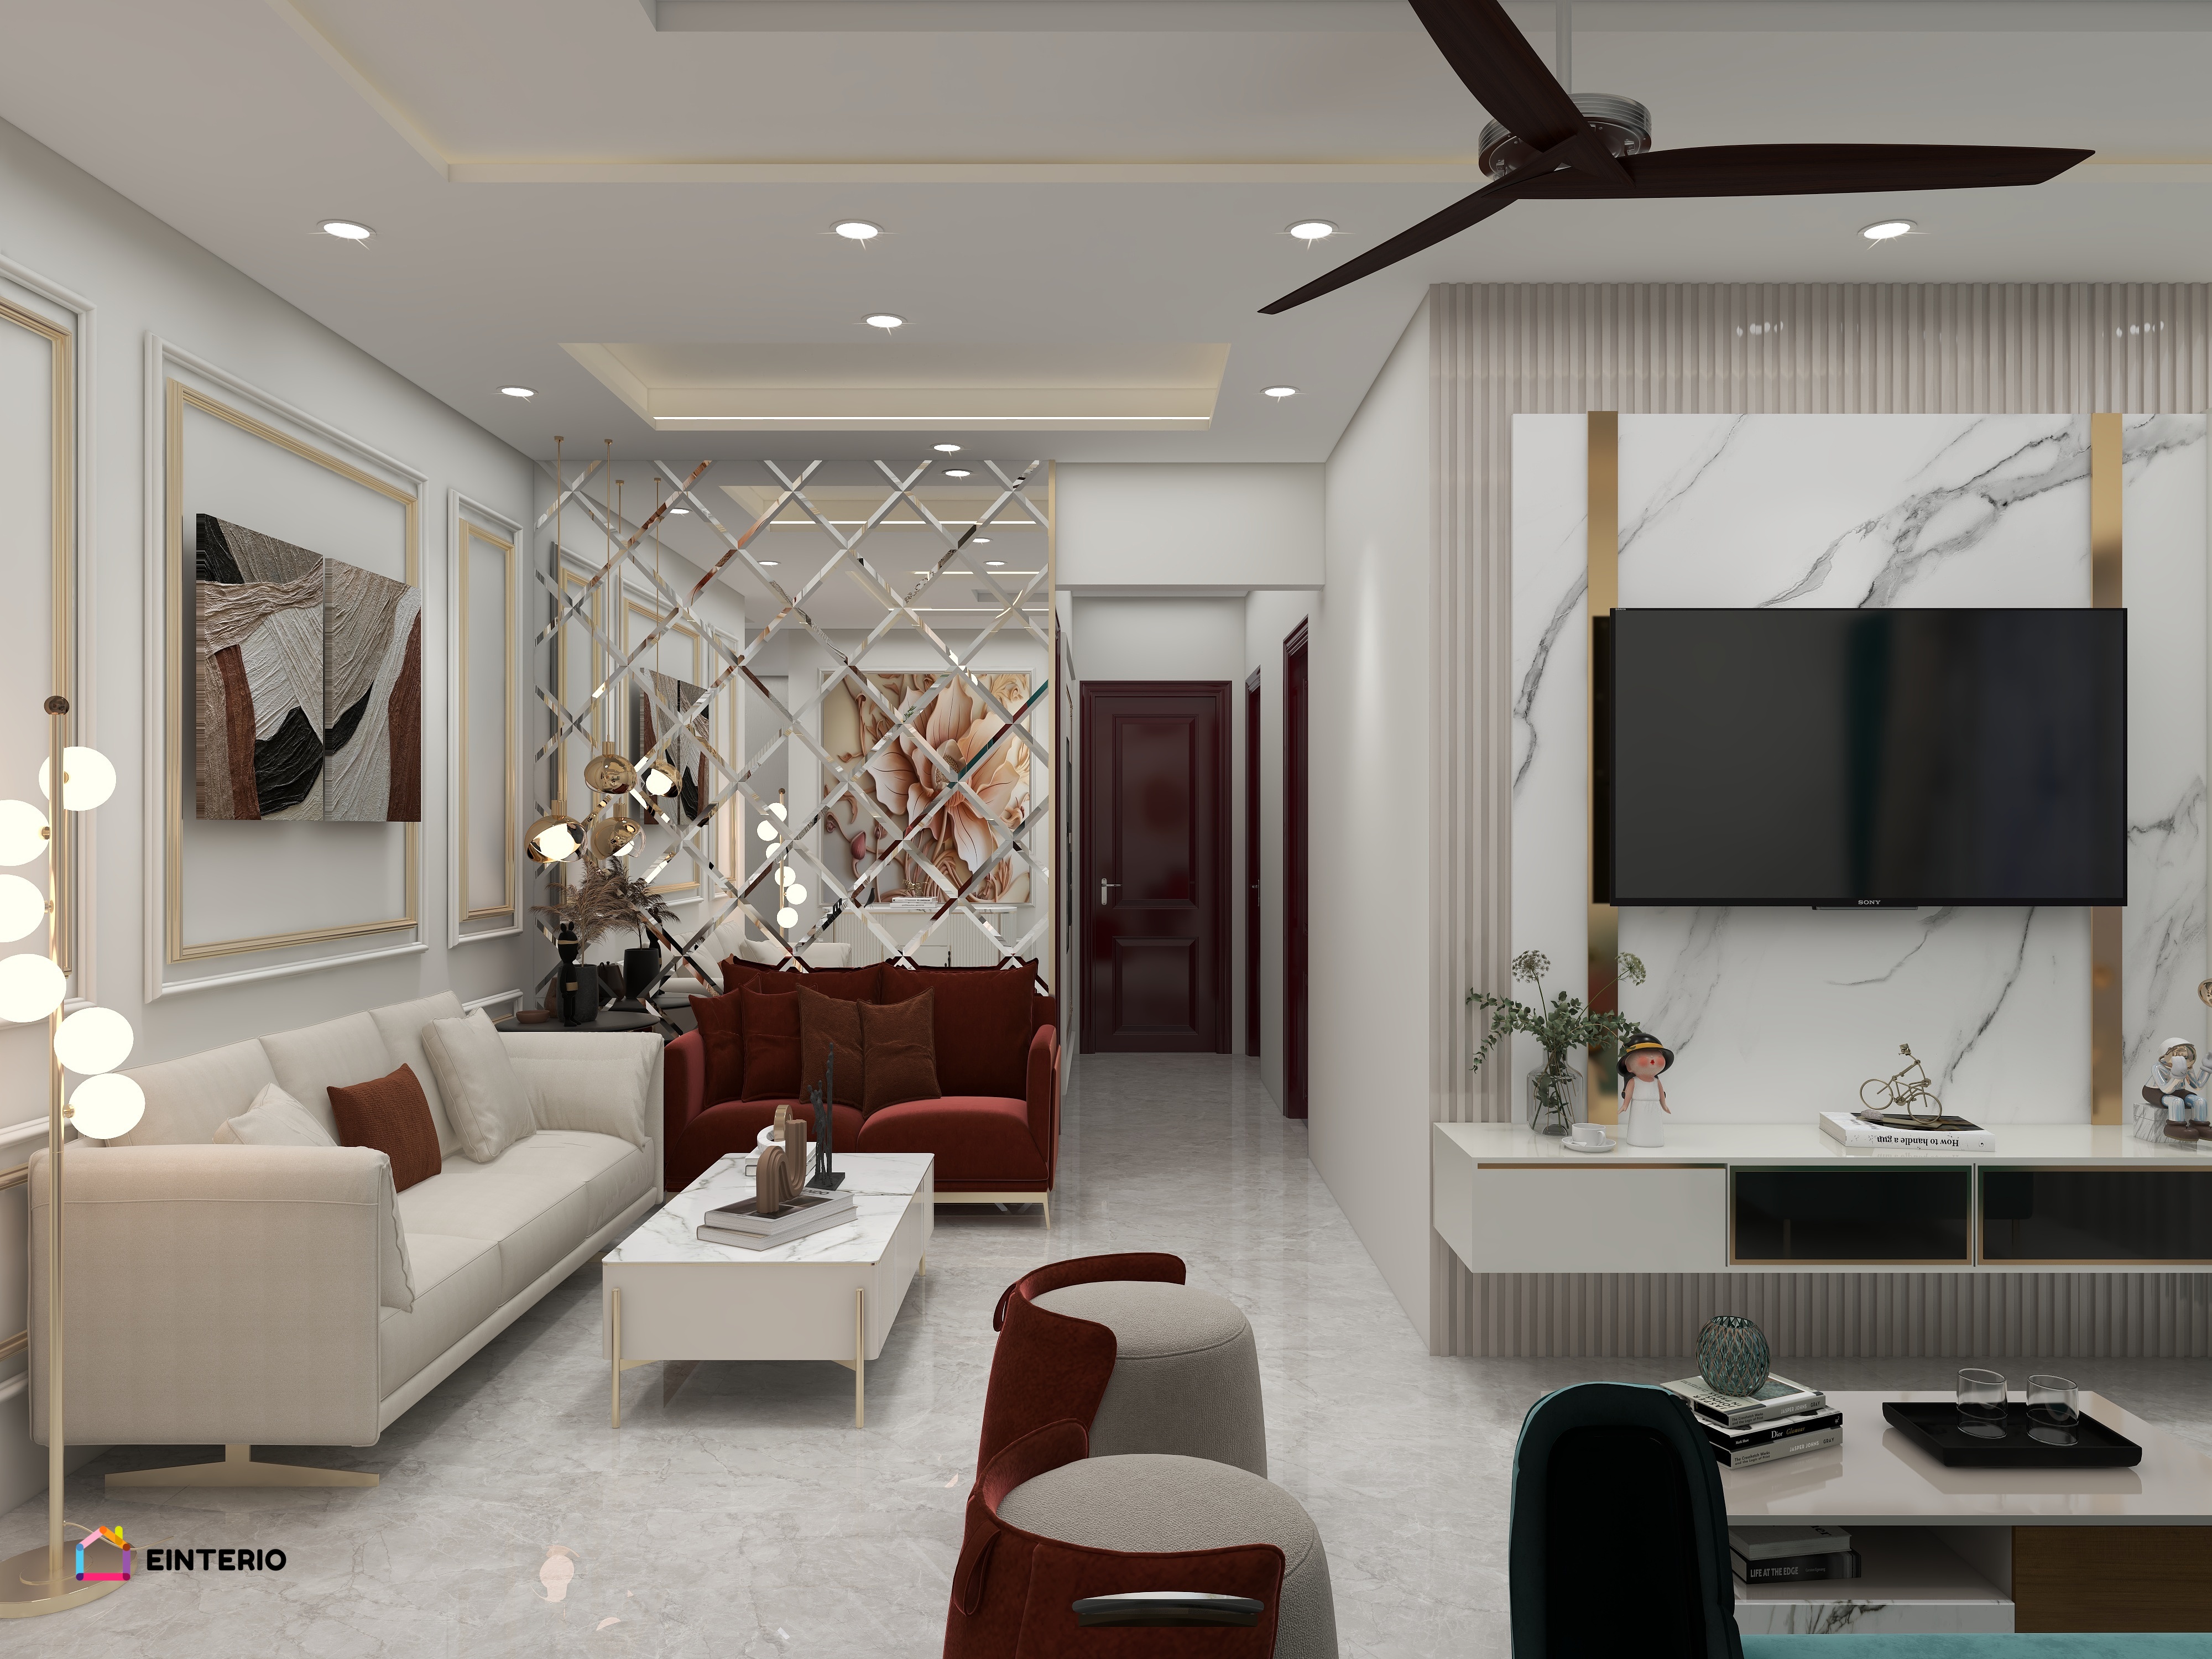  Dr. Manish &  Dr. Mahek Project: 3bhk design  Theme: Modern contemporary